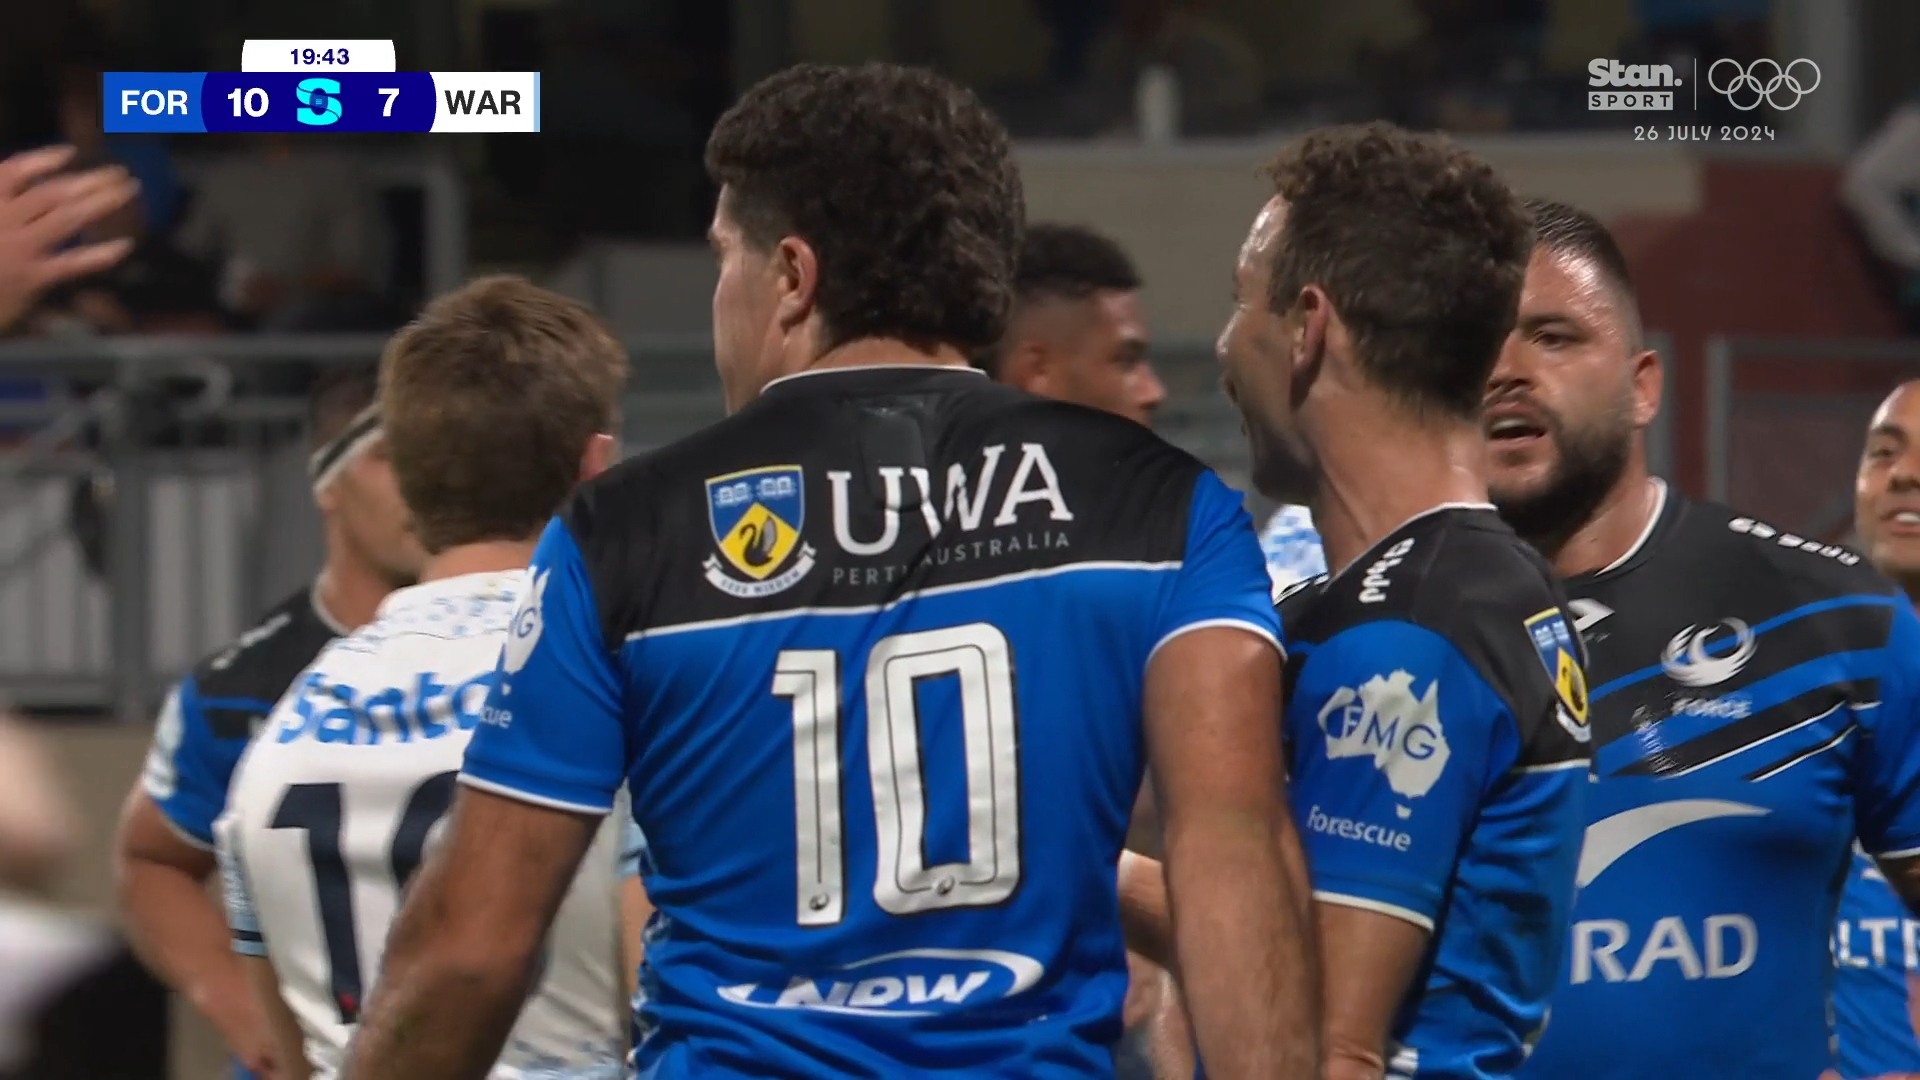 Western Force try wows commentators